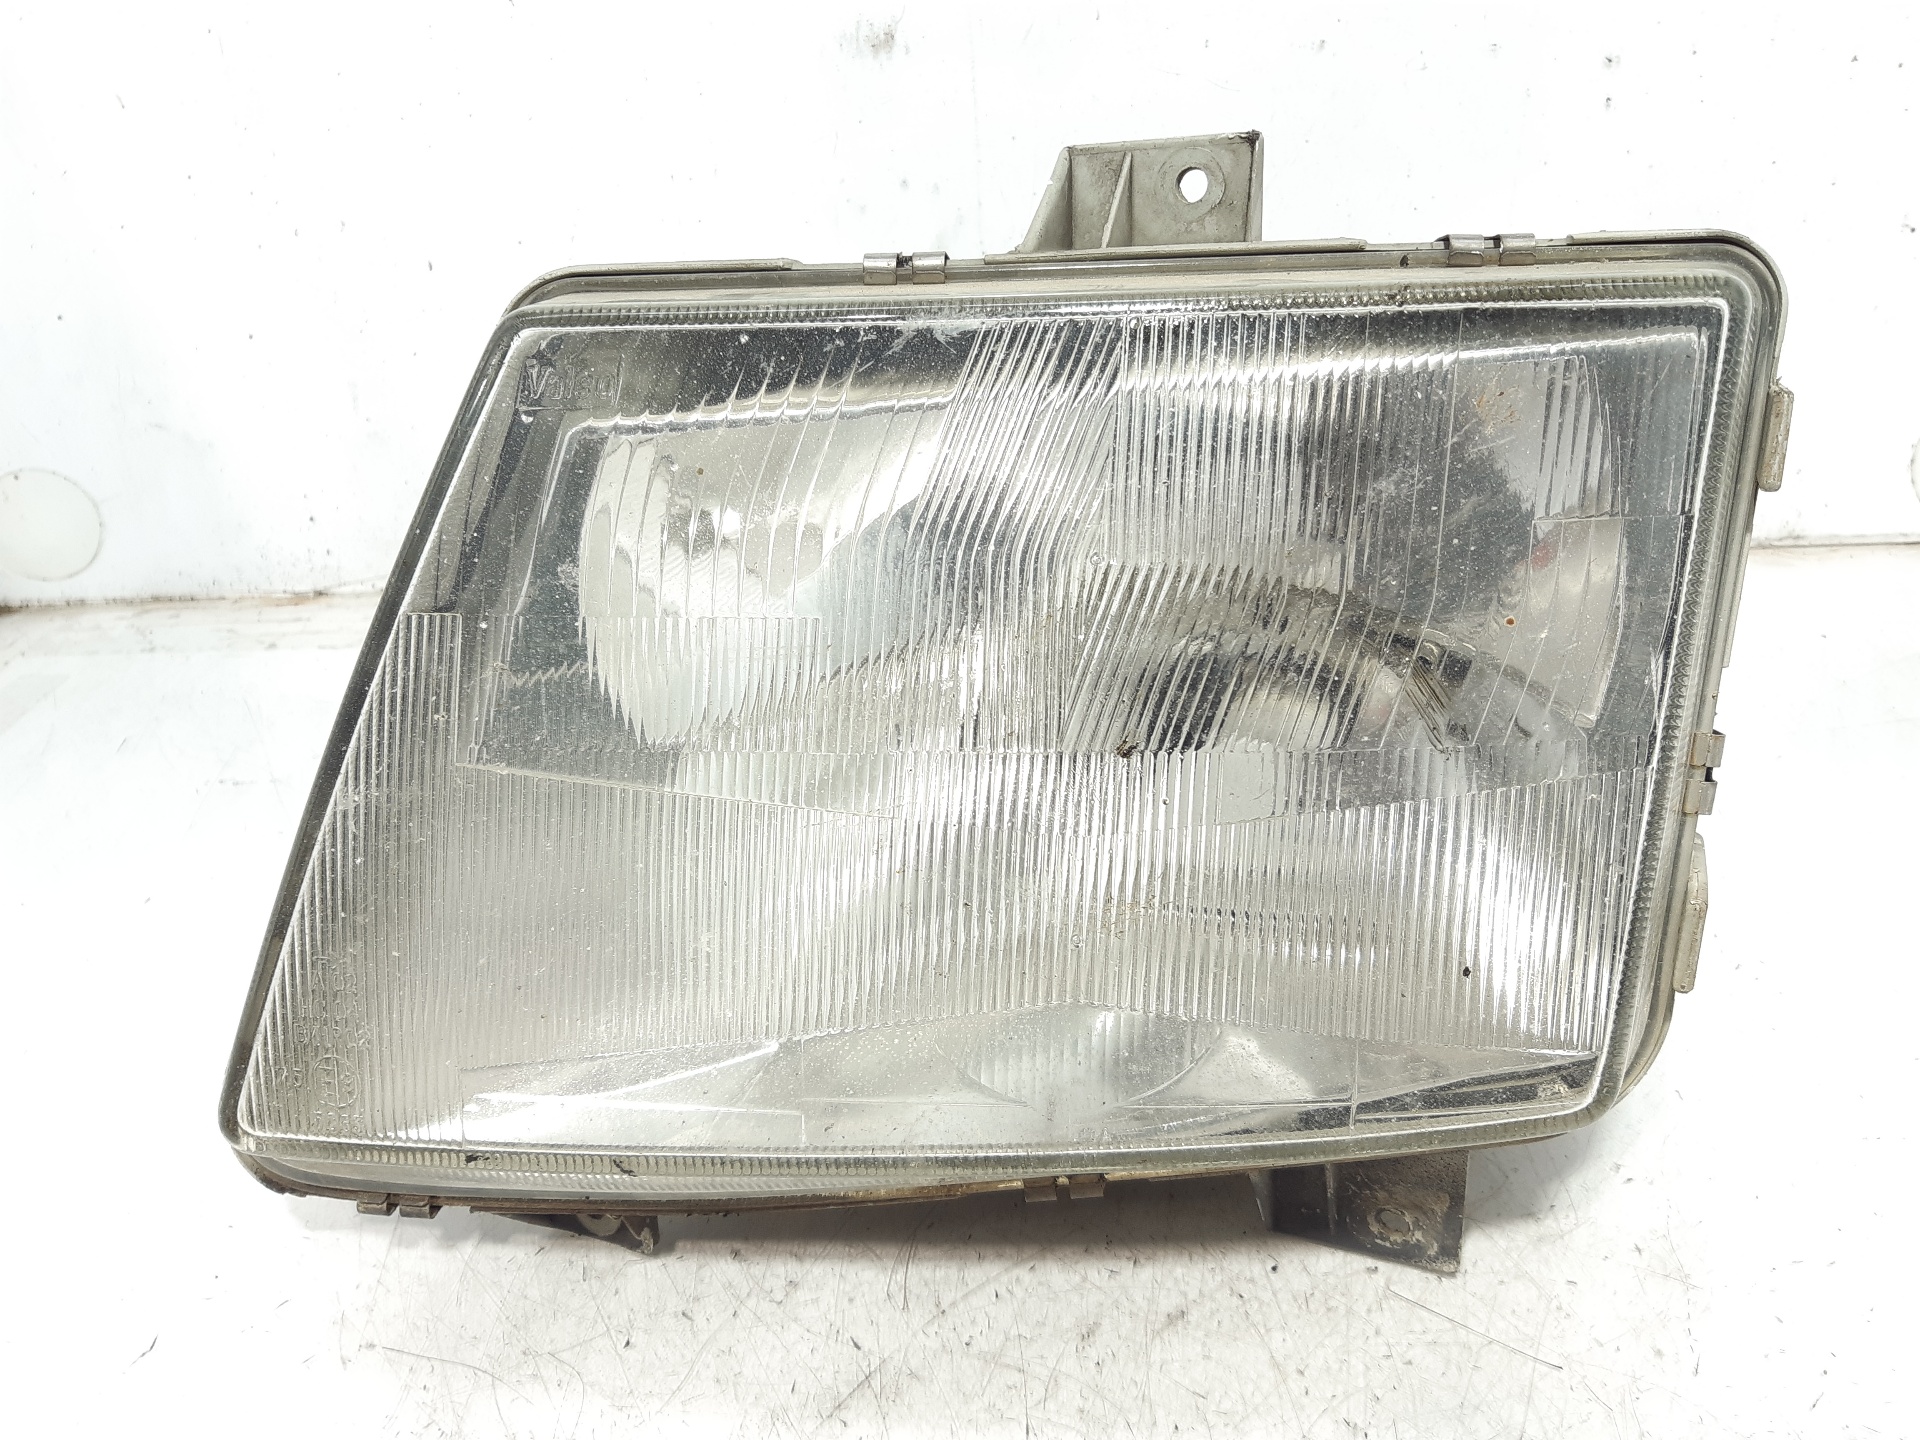 MERCEDES-BENZ Vito W638 (1996-2003) Front venstre frontlykt 6388200061 24932385